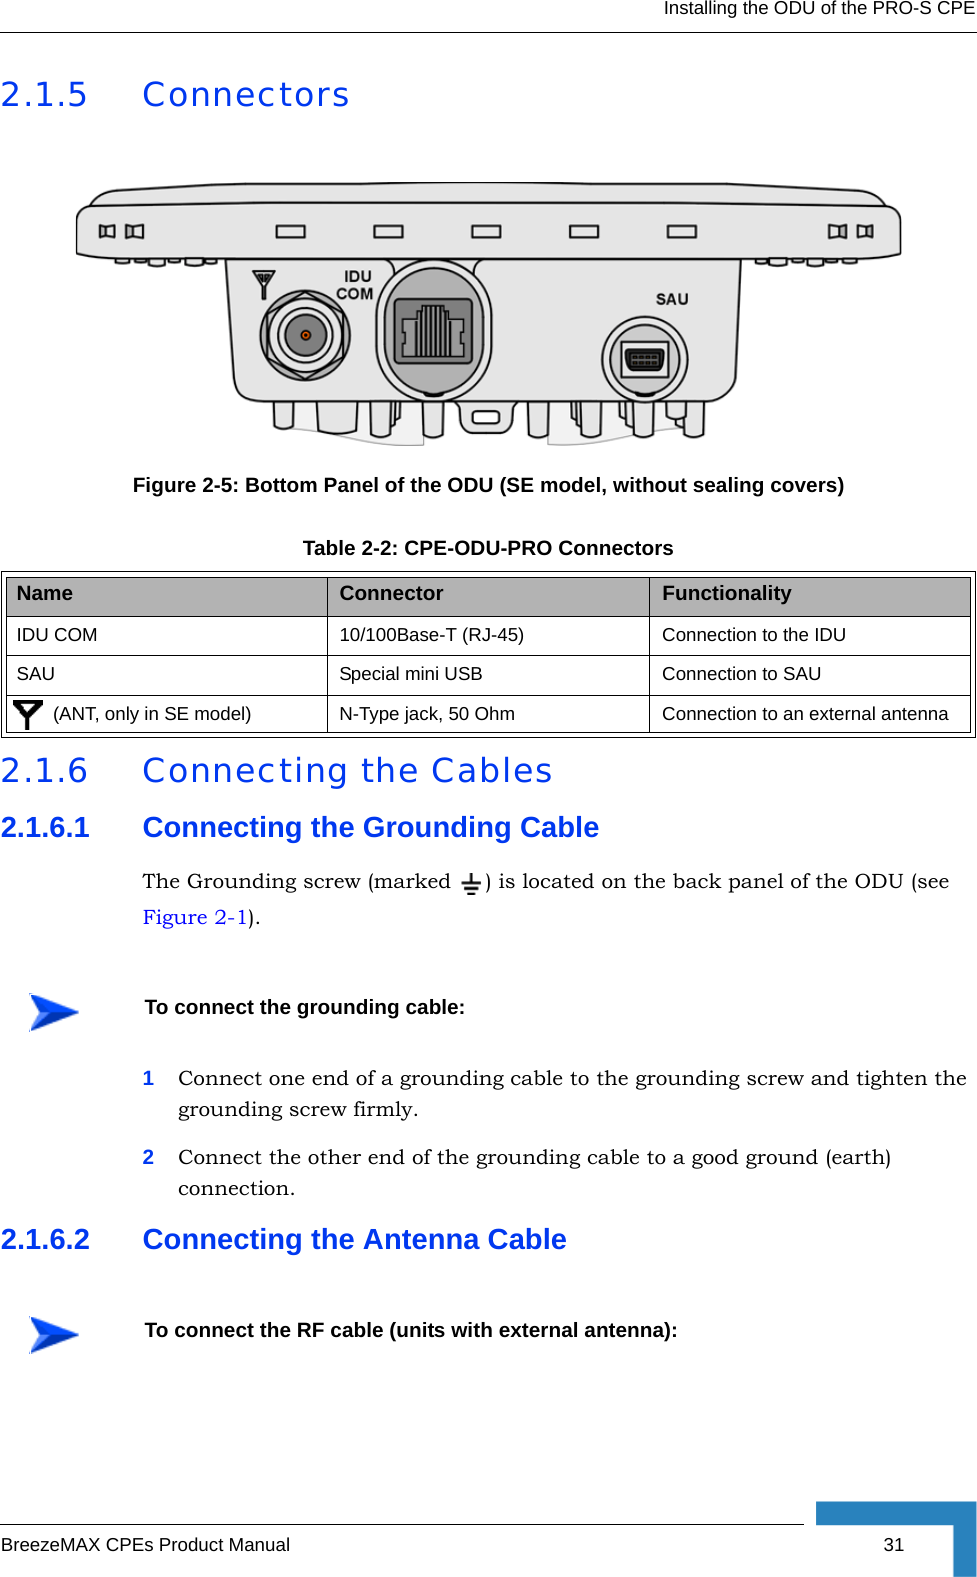 Installing the ODU of the PRO-S CPEBreezeMAX CPEs Product Manual 312.1.5 Connectors2.1.6 Connecting the Cables2.1.6.1 Connecting the Grounding CableThe Grounding screw (marked  ) is located on the back panel of the ODU (see Figure 2-1).1Connect one end of a grounding cable to the grounding screw and tighten the grounding screw firmly. 2Connect the other end of the grounding cable to a good ground (earth) connection.2.1.6.2 Connecting the Antenna CableFigure 2-5: Bottom Panel of the ODU (SE model, without sealing covers)Table 2-2: CPE-ODU-PRO ConnectorsName Connector FunctionalityIDU COM 10/100Base-T (RJ-45) Connection to the IDUSAU Special mini USB Connection to SAU       (ANT, only in SE model) N-Type jack, 50 Ohm Connection to an external antennaTo connect the grounding cable:To connect the RF cable (units with external antenna):